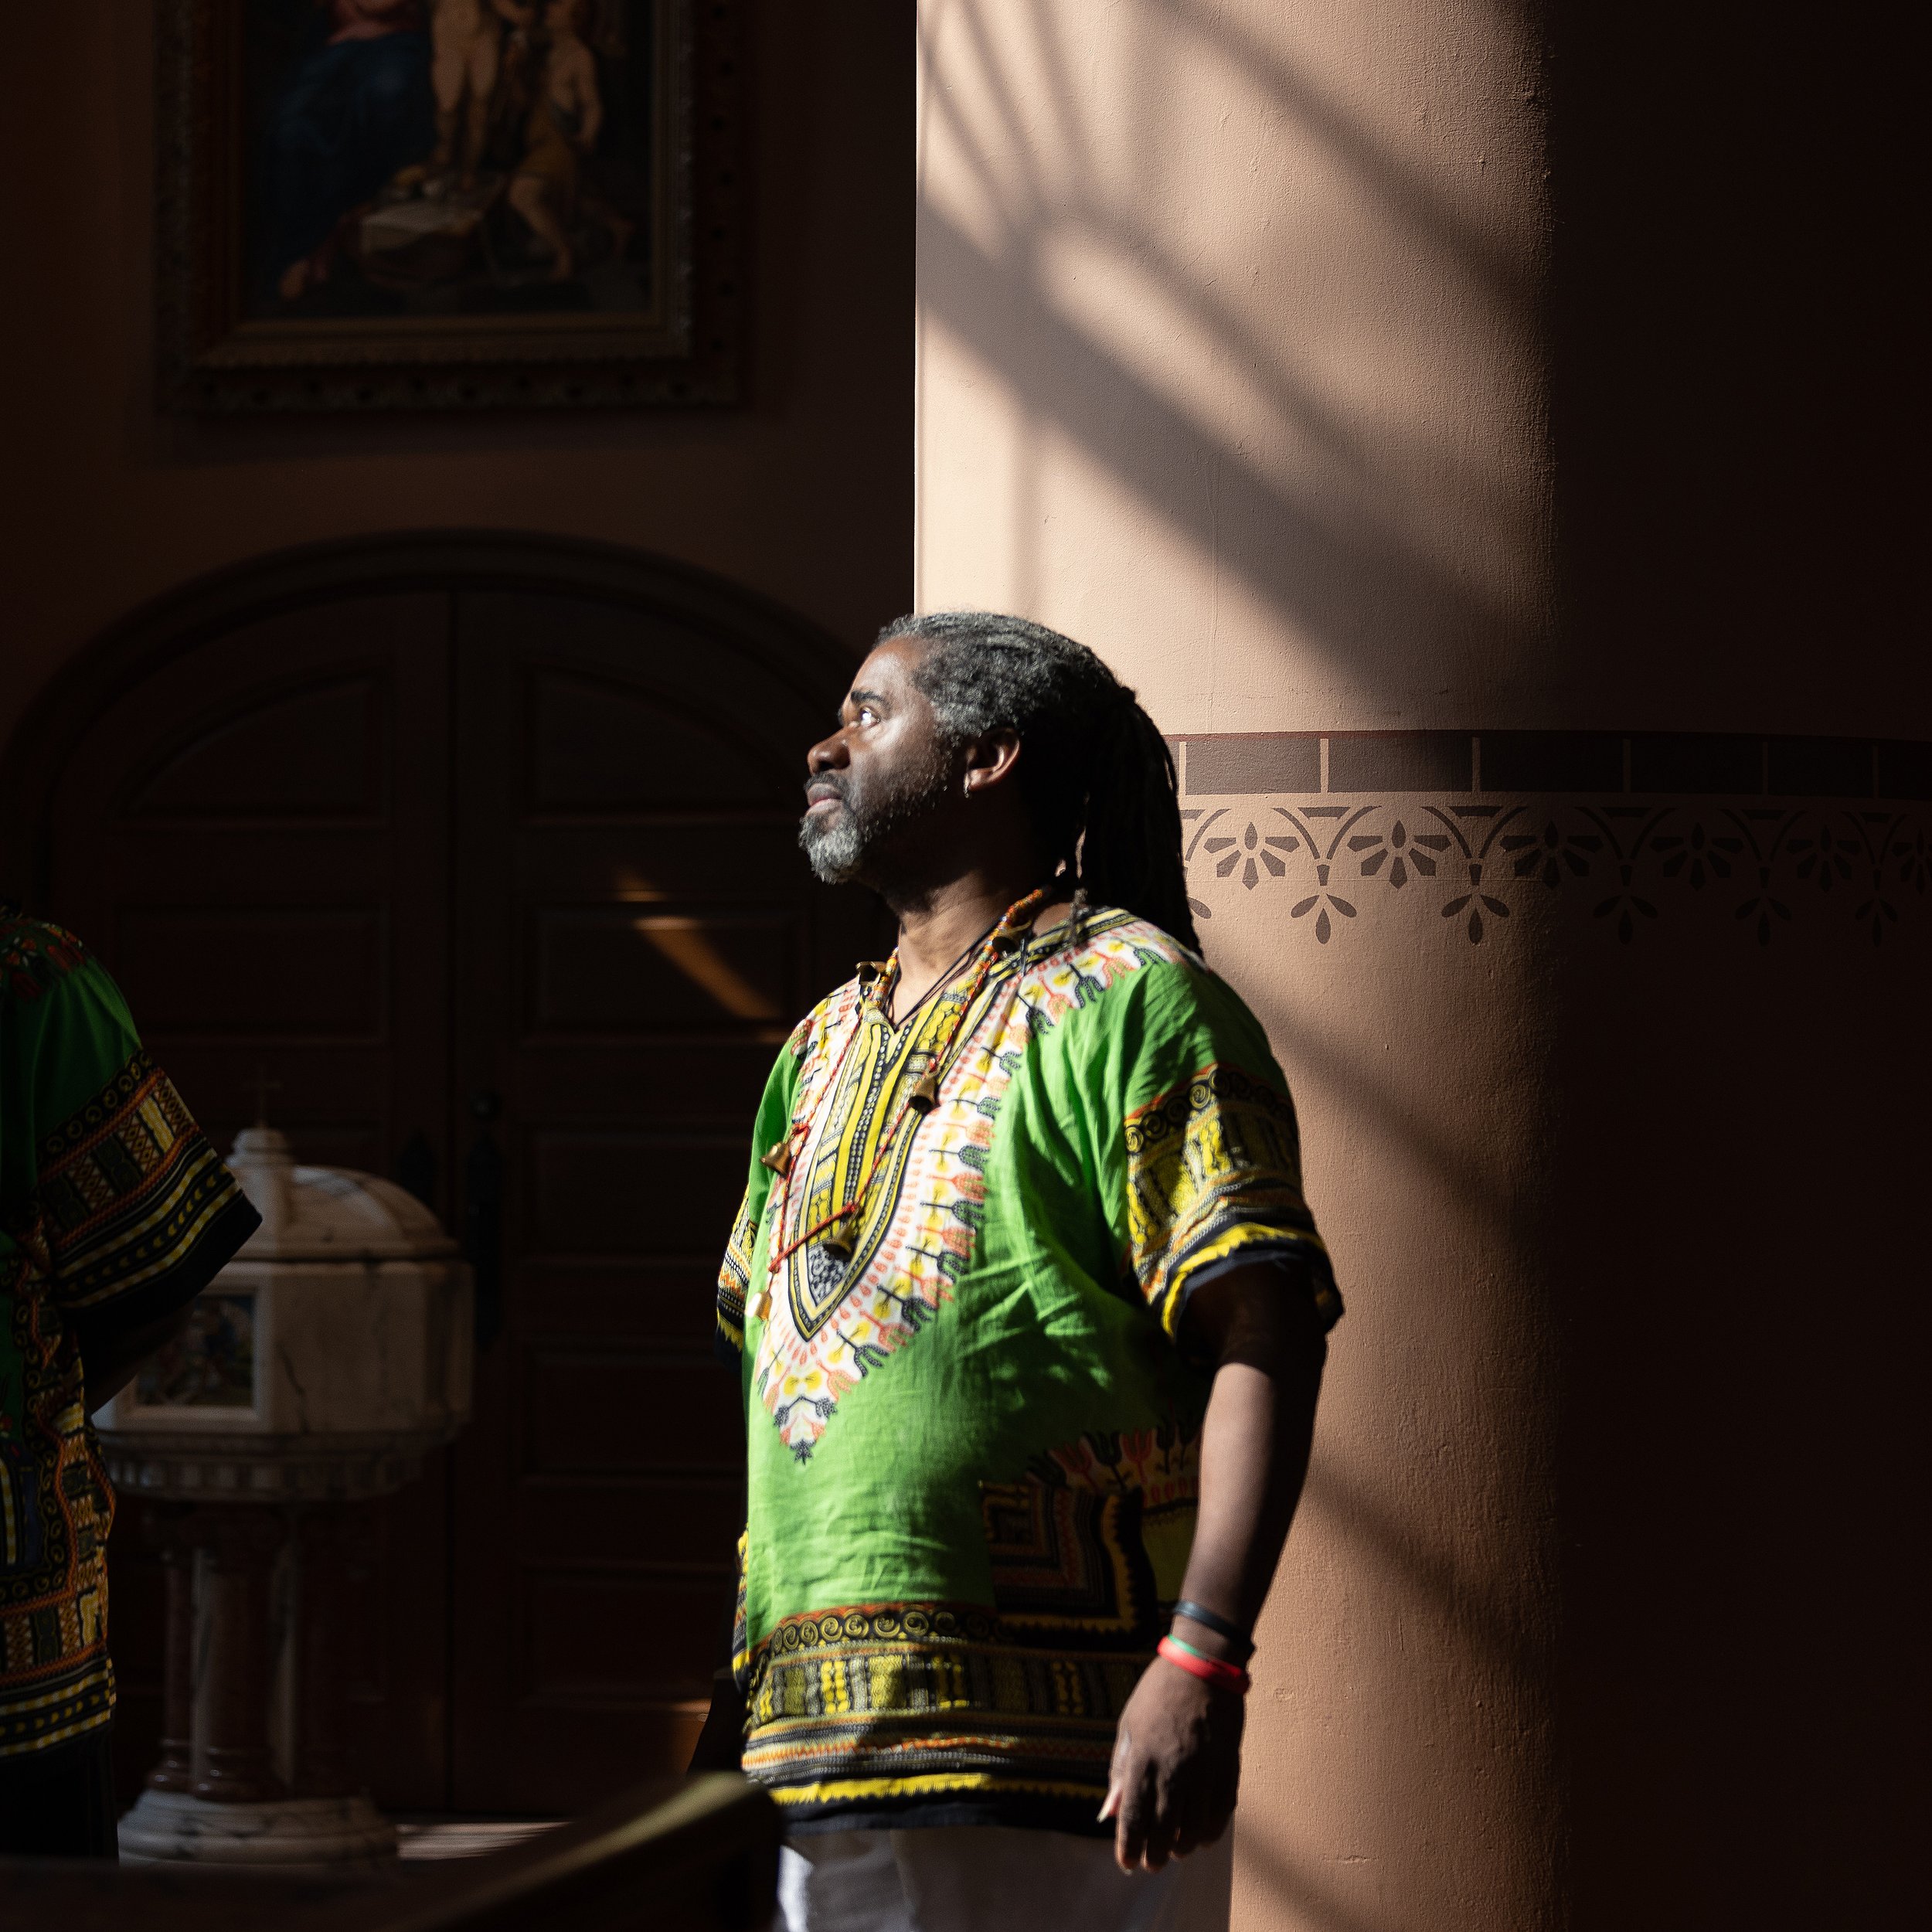  David A.N. Jackson, who provided African drumming for the second annual “Forgive Us Our Trespasses” Maafa procession and prayer service, stood in light from a window in the Basilica of St. Louis, King of France (Old Cathedral) on  June 17 in St. Lou